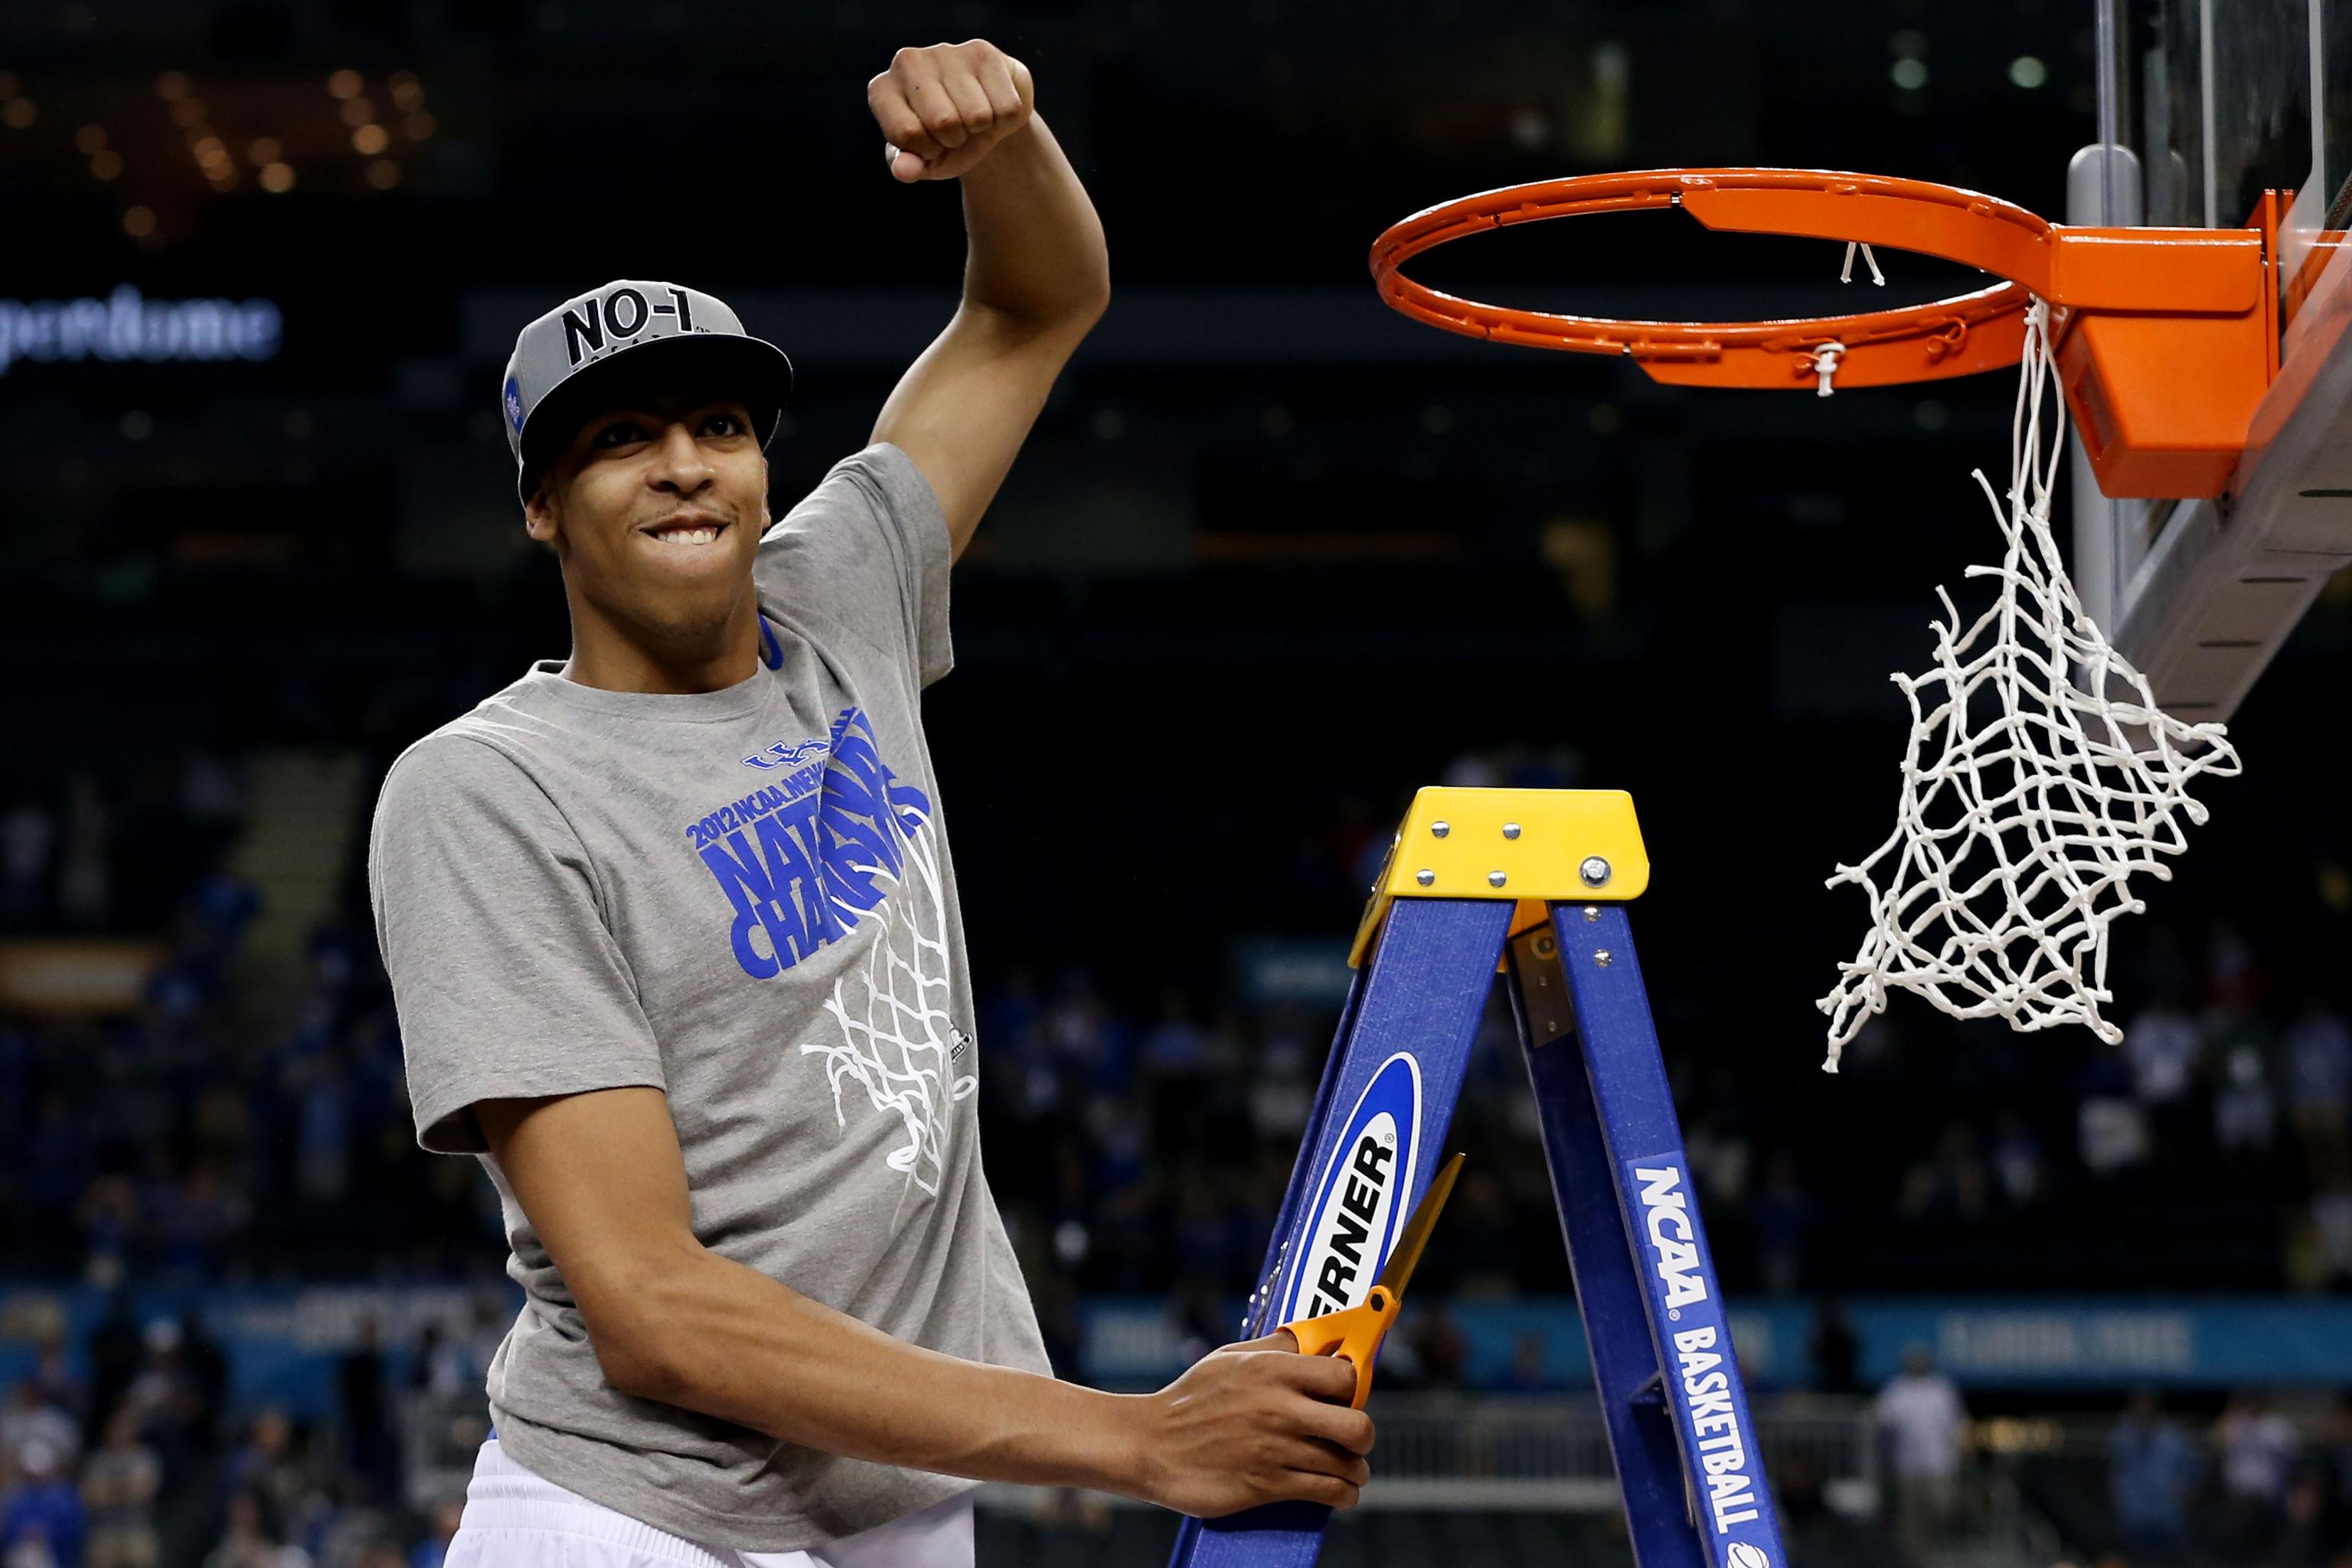 For once, Kentucky has no answers and thus no NCAA championship